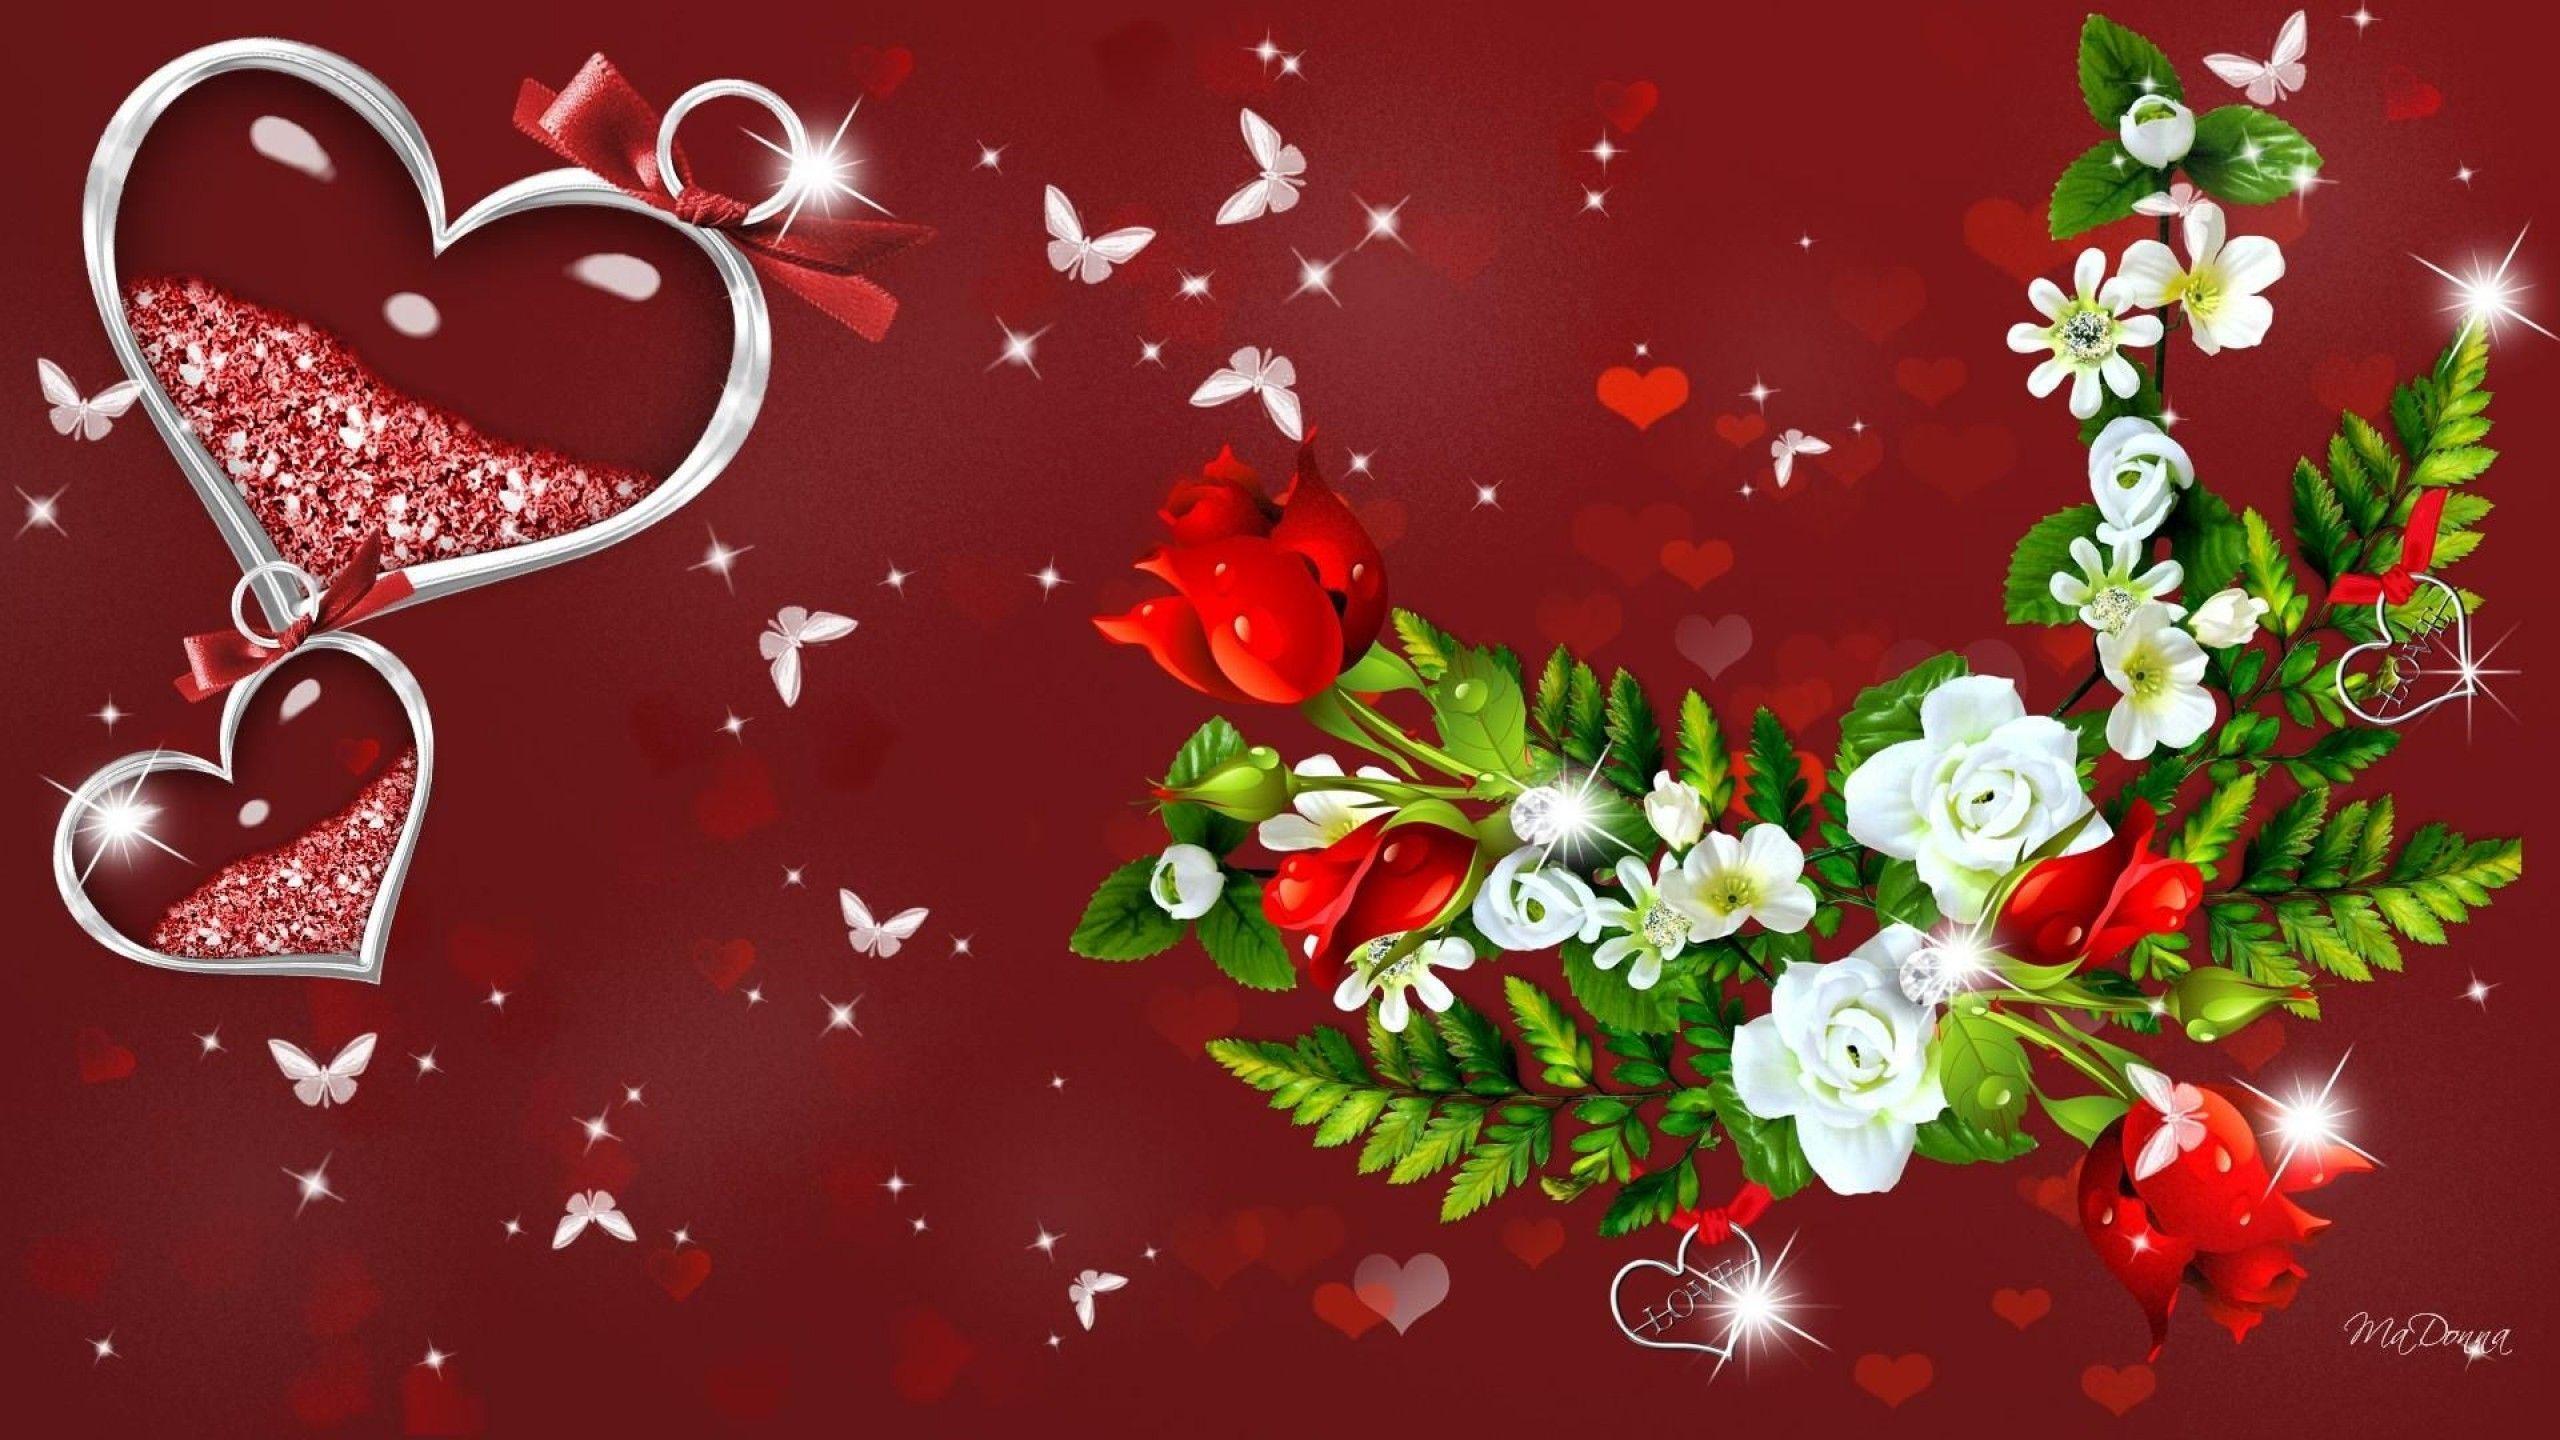 Download Roses Bouquet Valentine Wallpaper HD (4365) Full